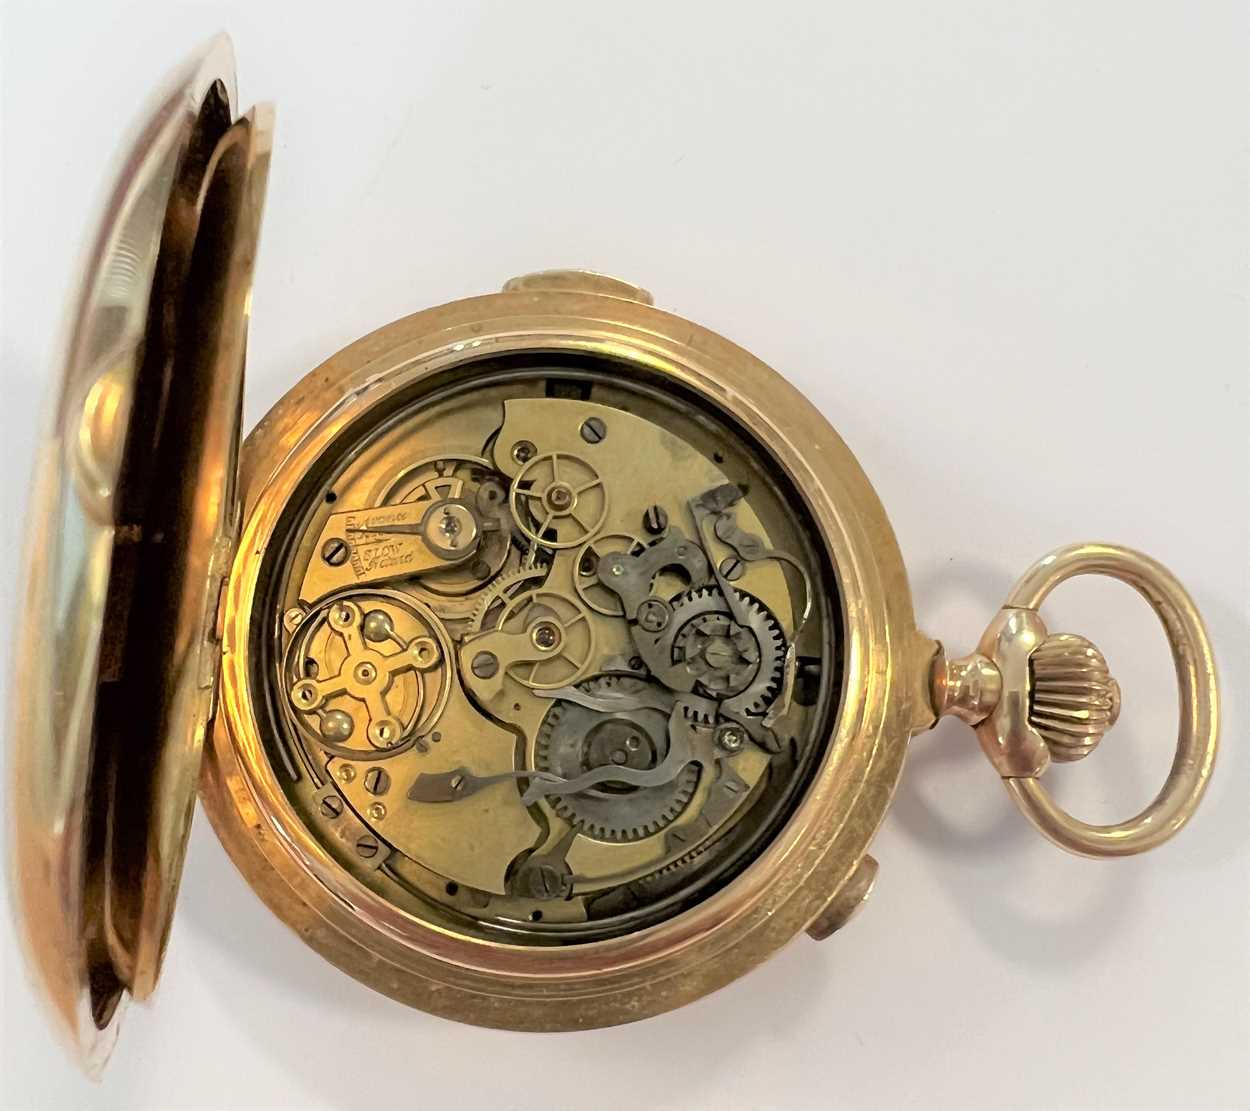 Audemars Frères, Genève - A Swiss 14ct gold quarter repeating chronograph full hunter pocket watch, - Image 9 of 10